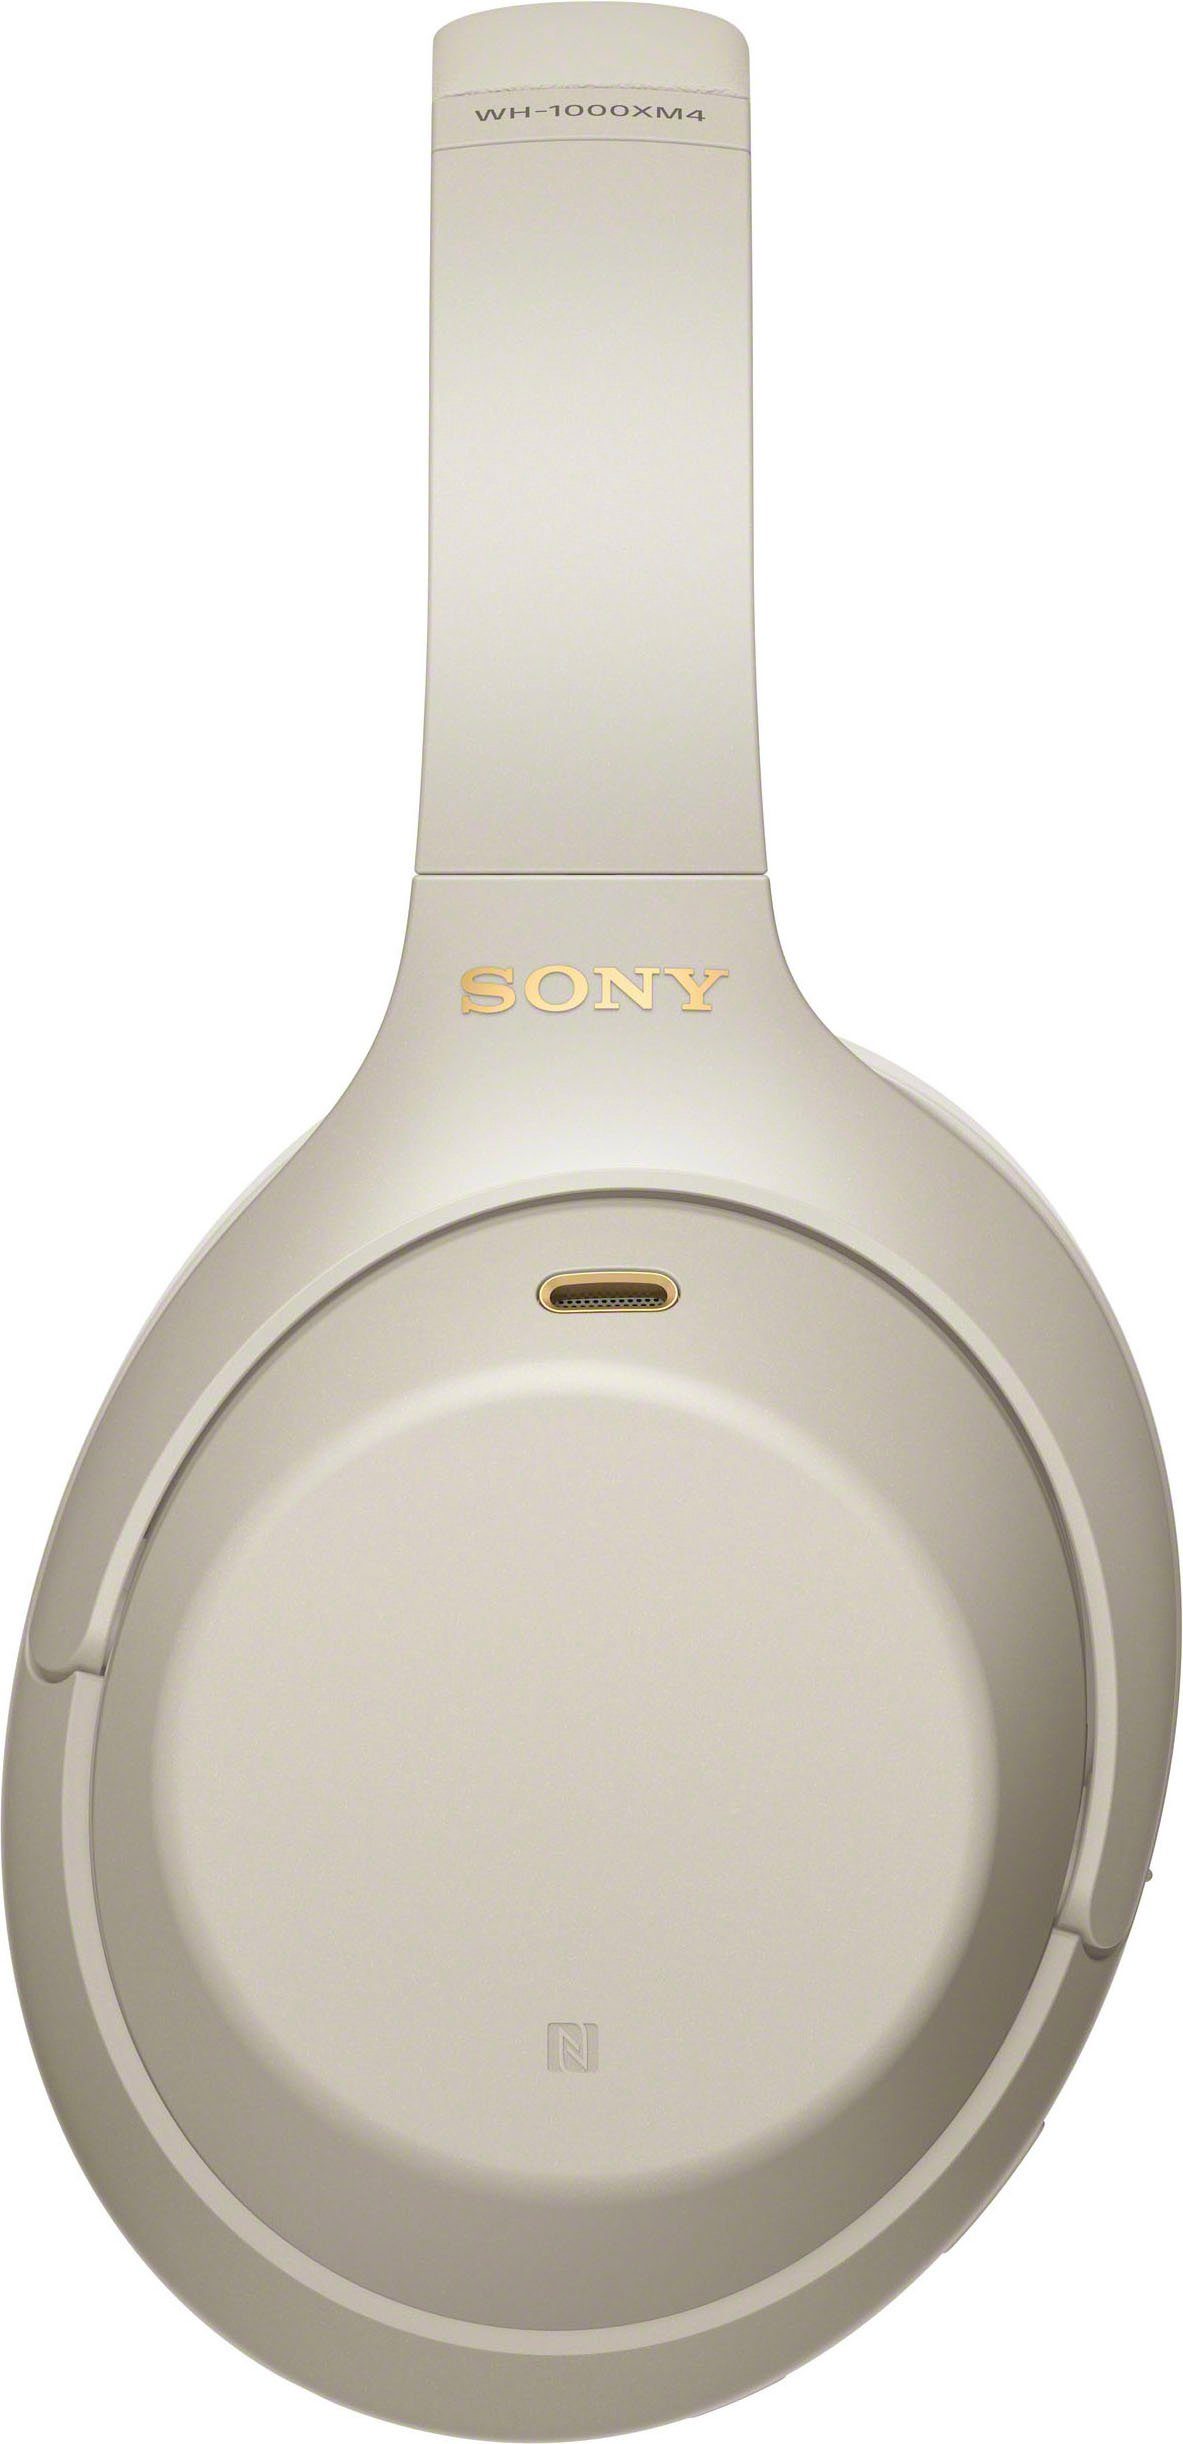 Sony WH-1000XM4 kabelloser Sensor, Schnellladefunktion) One-Touch NFC, Silber NFC, Bluetooth, (Noise-Cancelling, via Over-Ear-Kopfhörer Touch Verbindung